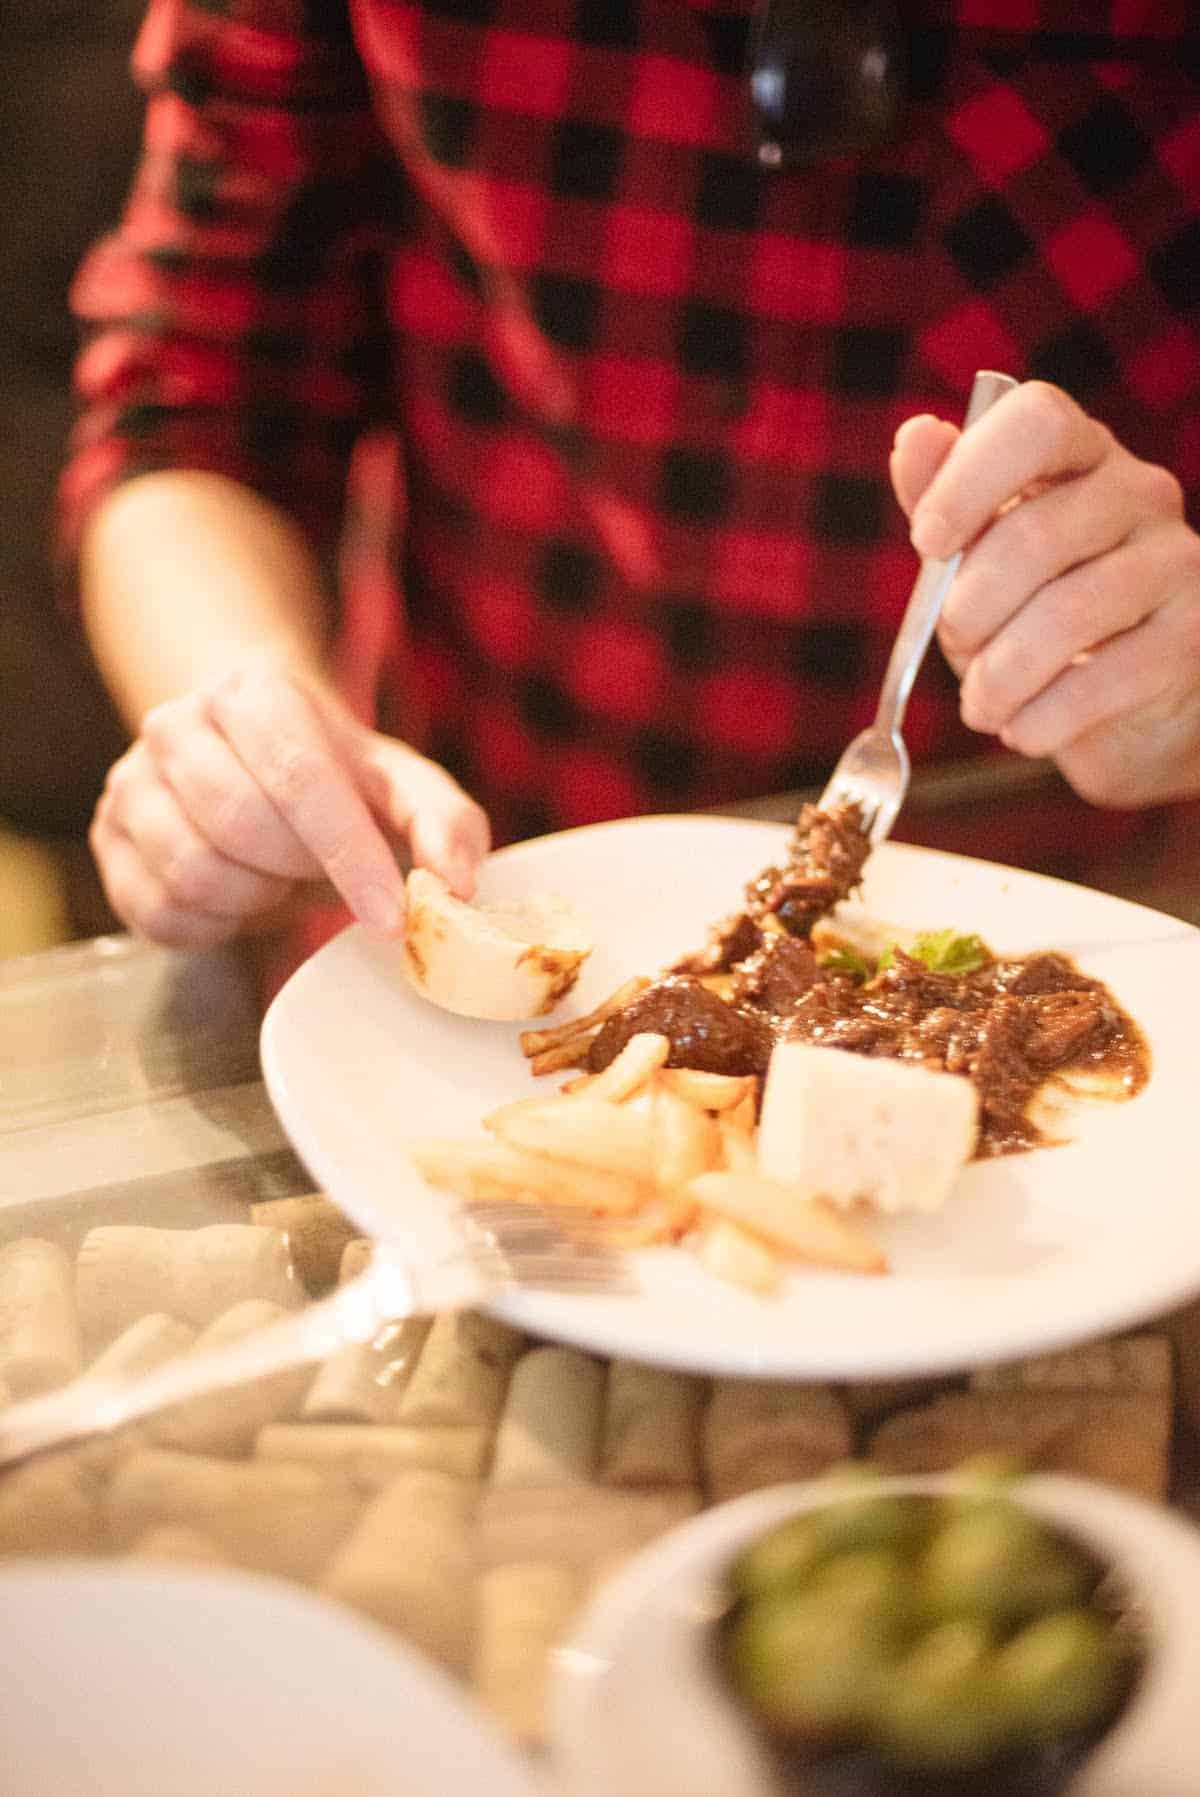 Close up of a person eating a meat dish while holding a small chunk of bread in the other hand.